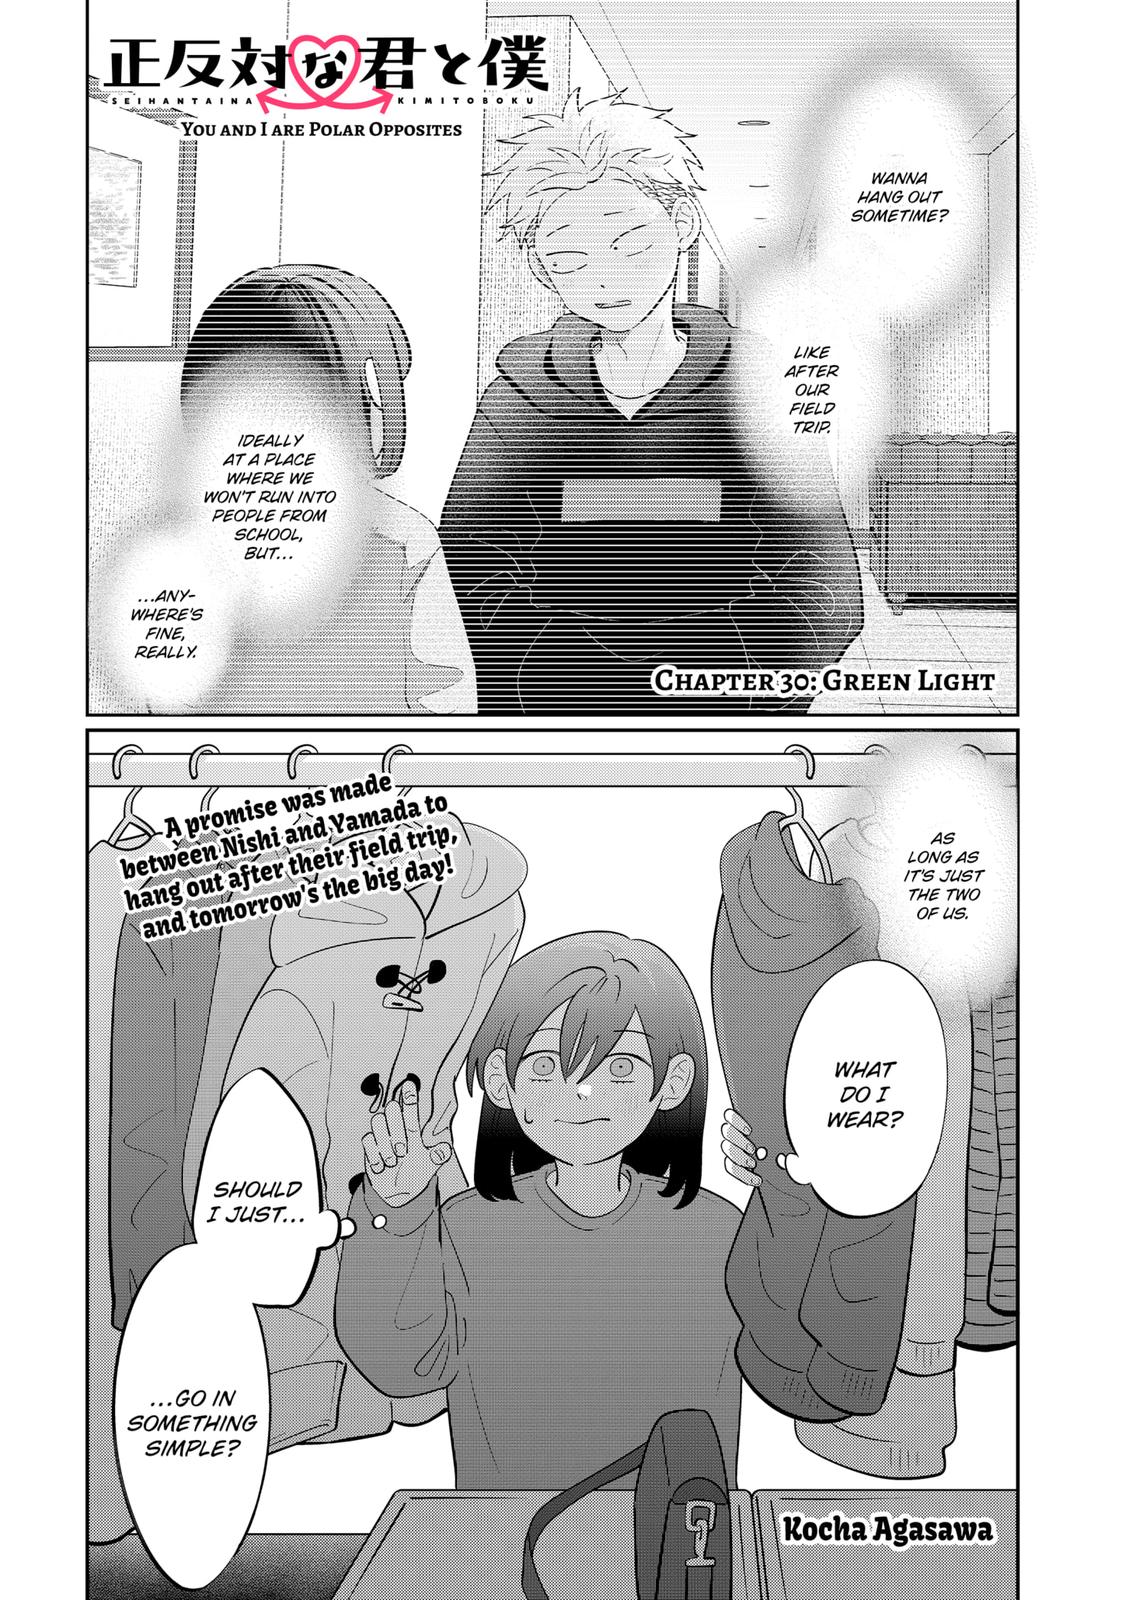 You And I Are Polar Opposites - Page 1